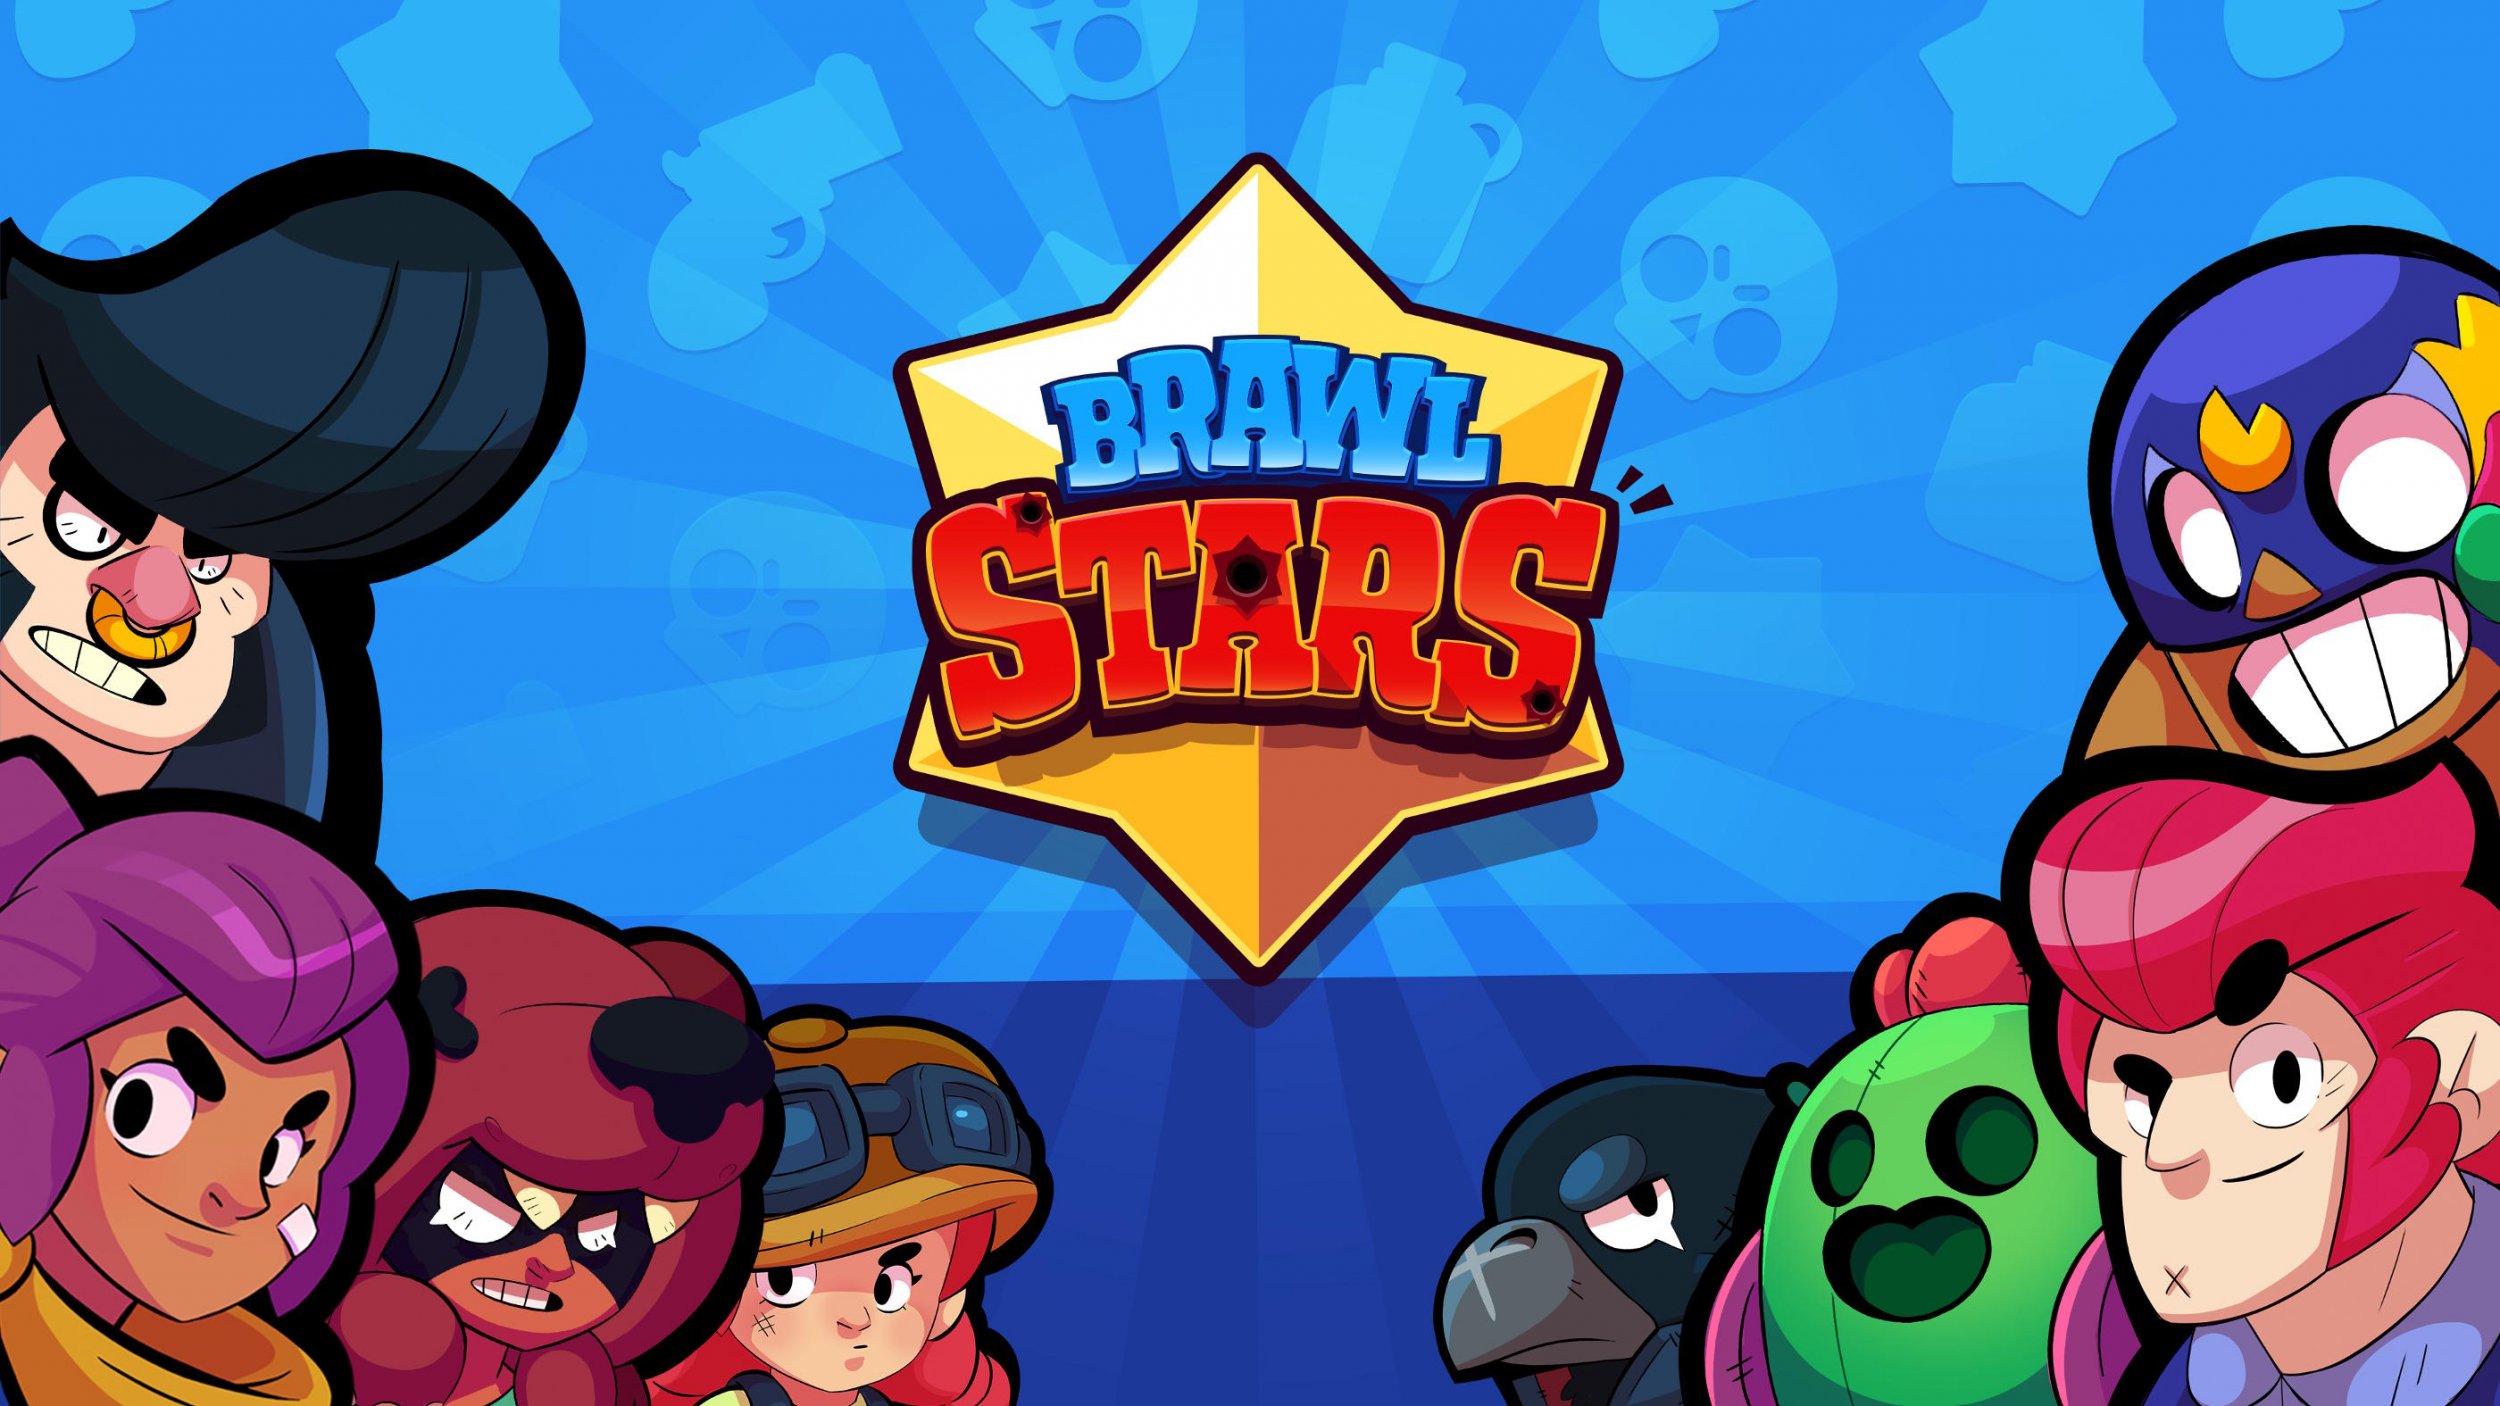 Brawl Stars Update New Upgrade System Landscape Mode And More - us release date for brawl stars